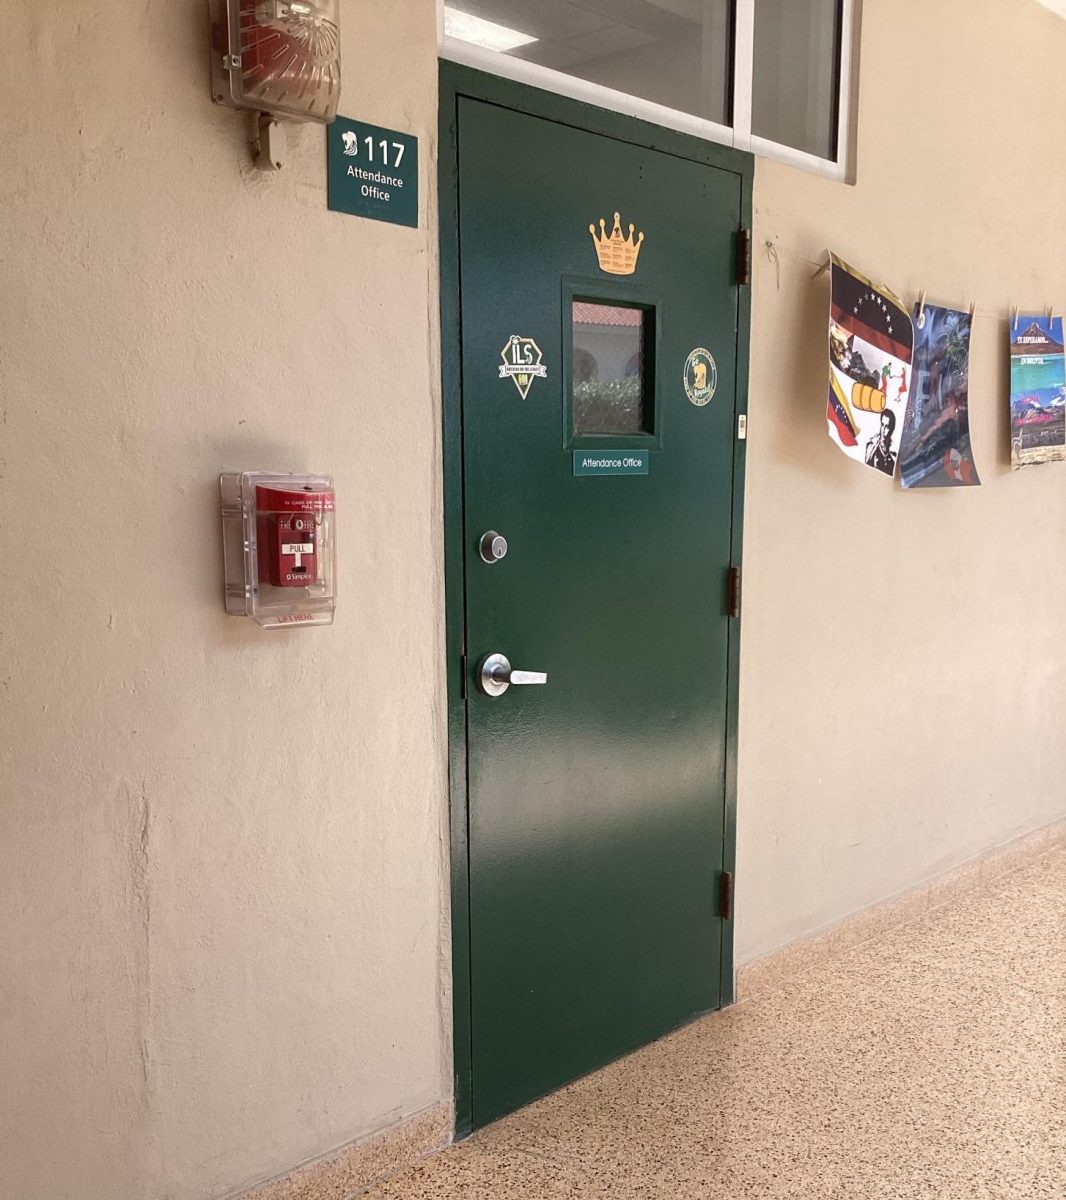 10 October - (7:47am) Behind the closed Attendance Office door, over 10 students wait in line for Mrs. Ana Garciga to write them a late pass.